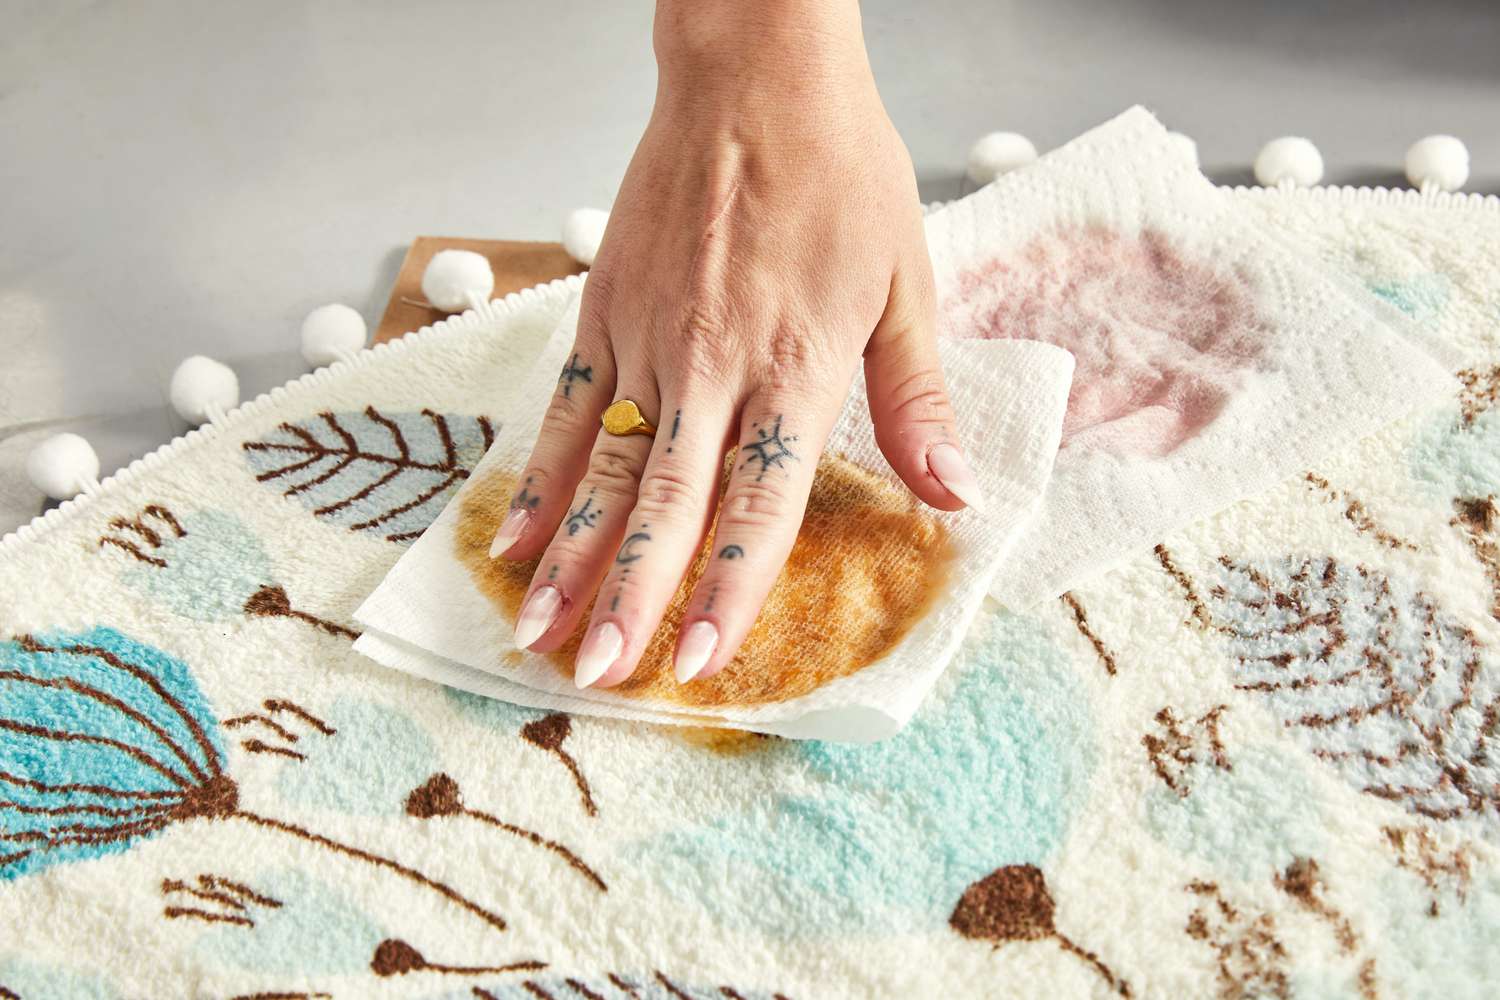 A person cleaning up big stains on the Uphome Pom Pom Round Floral Rug with a paper towel